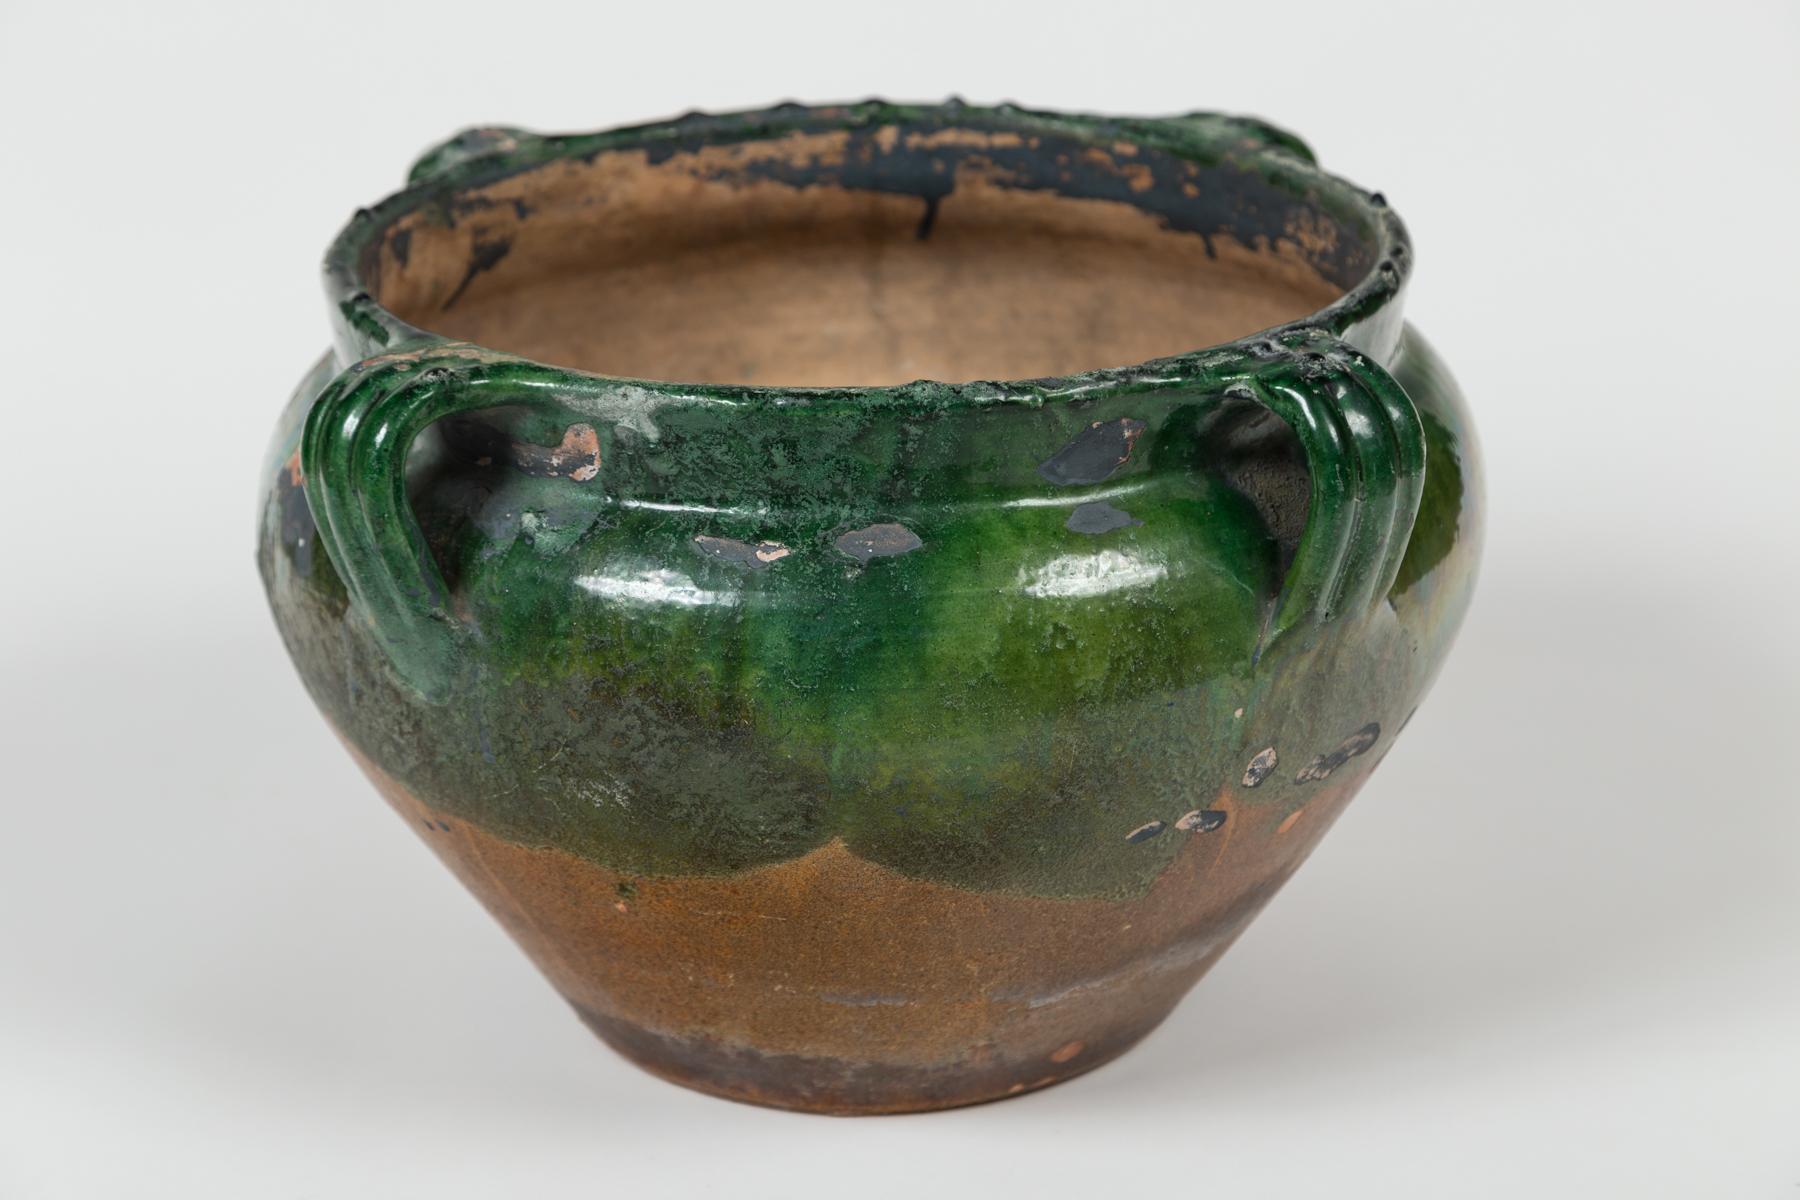 Antique Green Glazed Terracotta Planter, Provence, France, early 20th Century. Beautiful variegated green glazed pot with four handles.